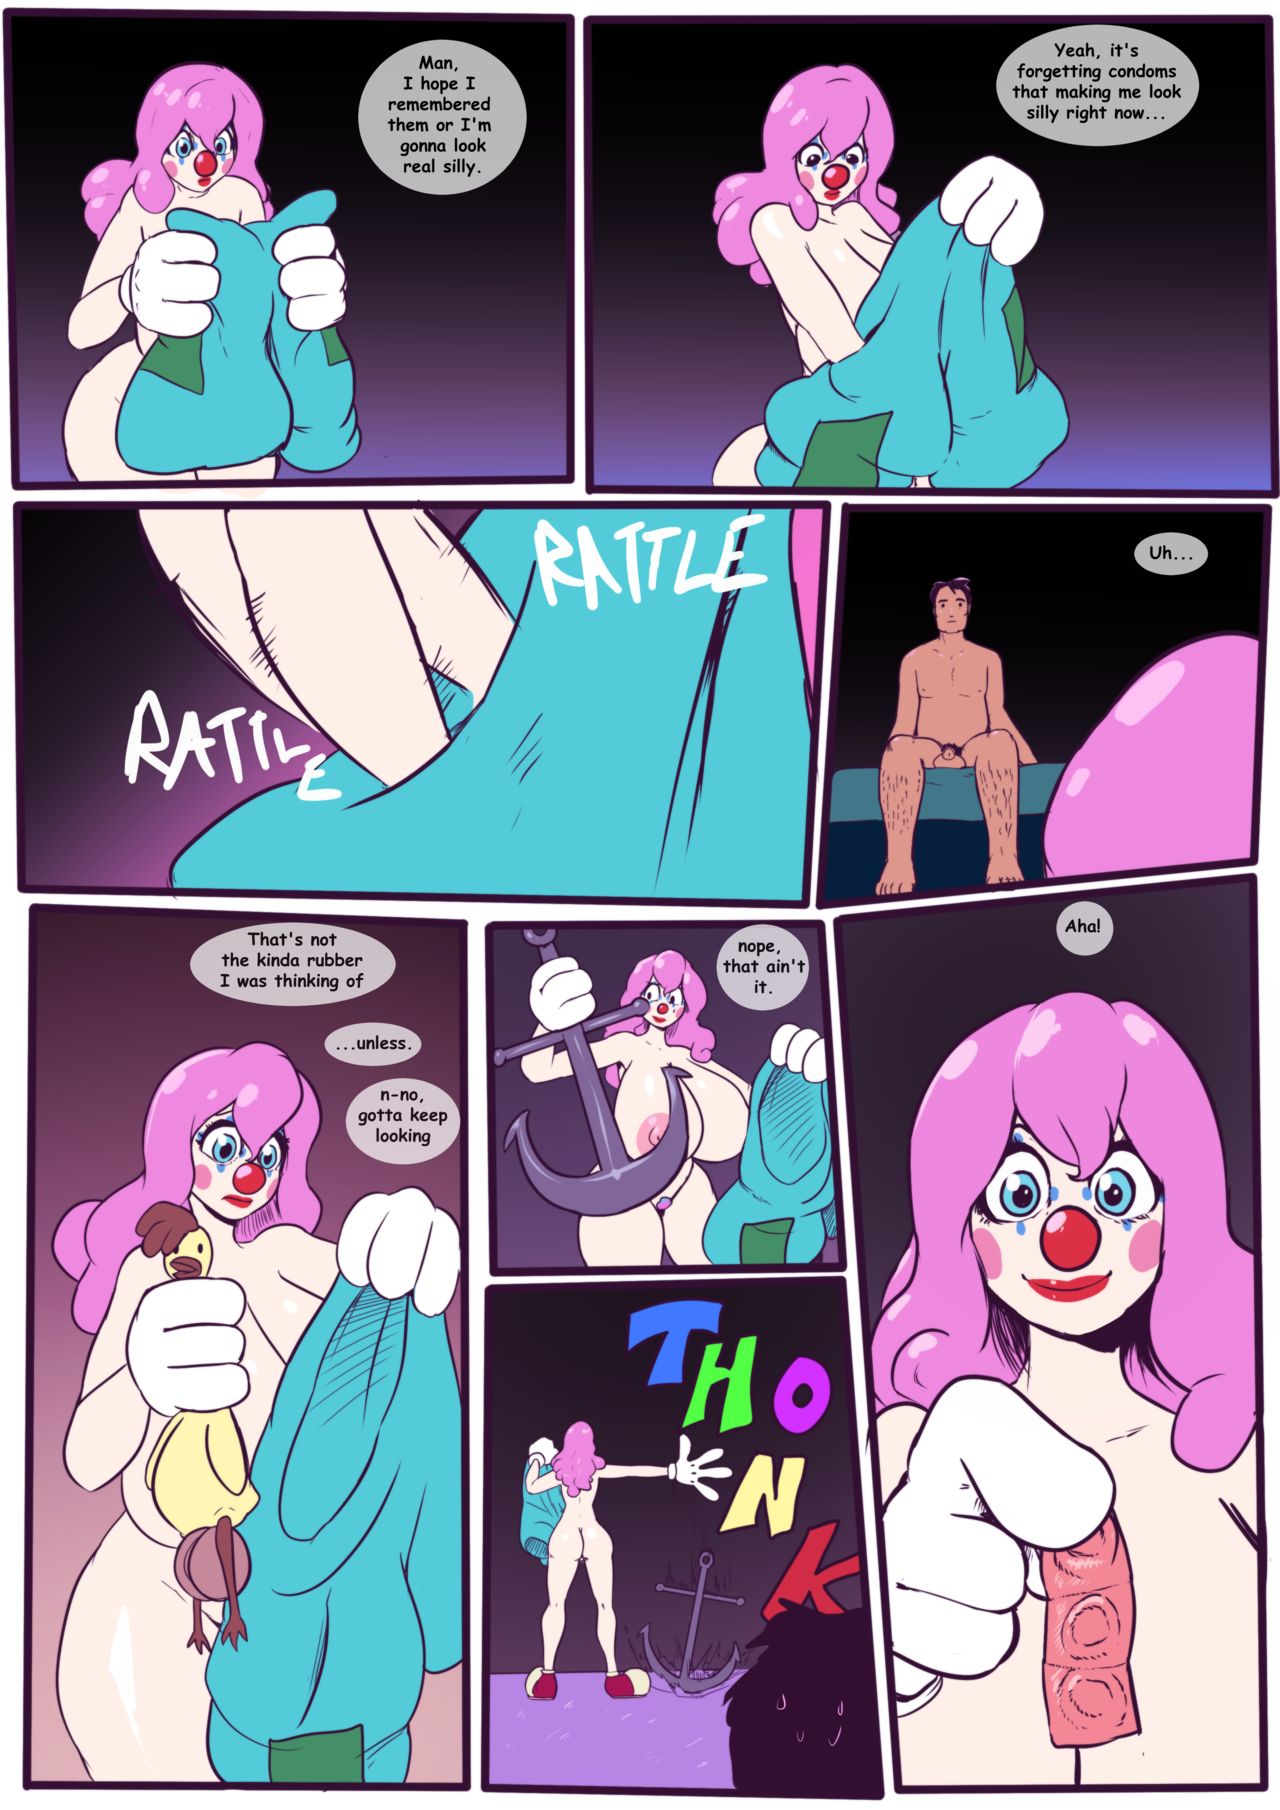 A Perfectly Normal Comic Where Nothing Weird Happens Lemonfont 25